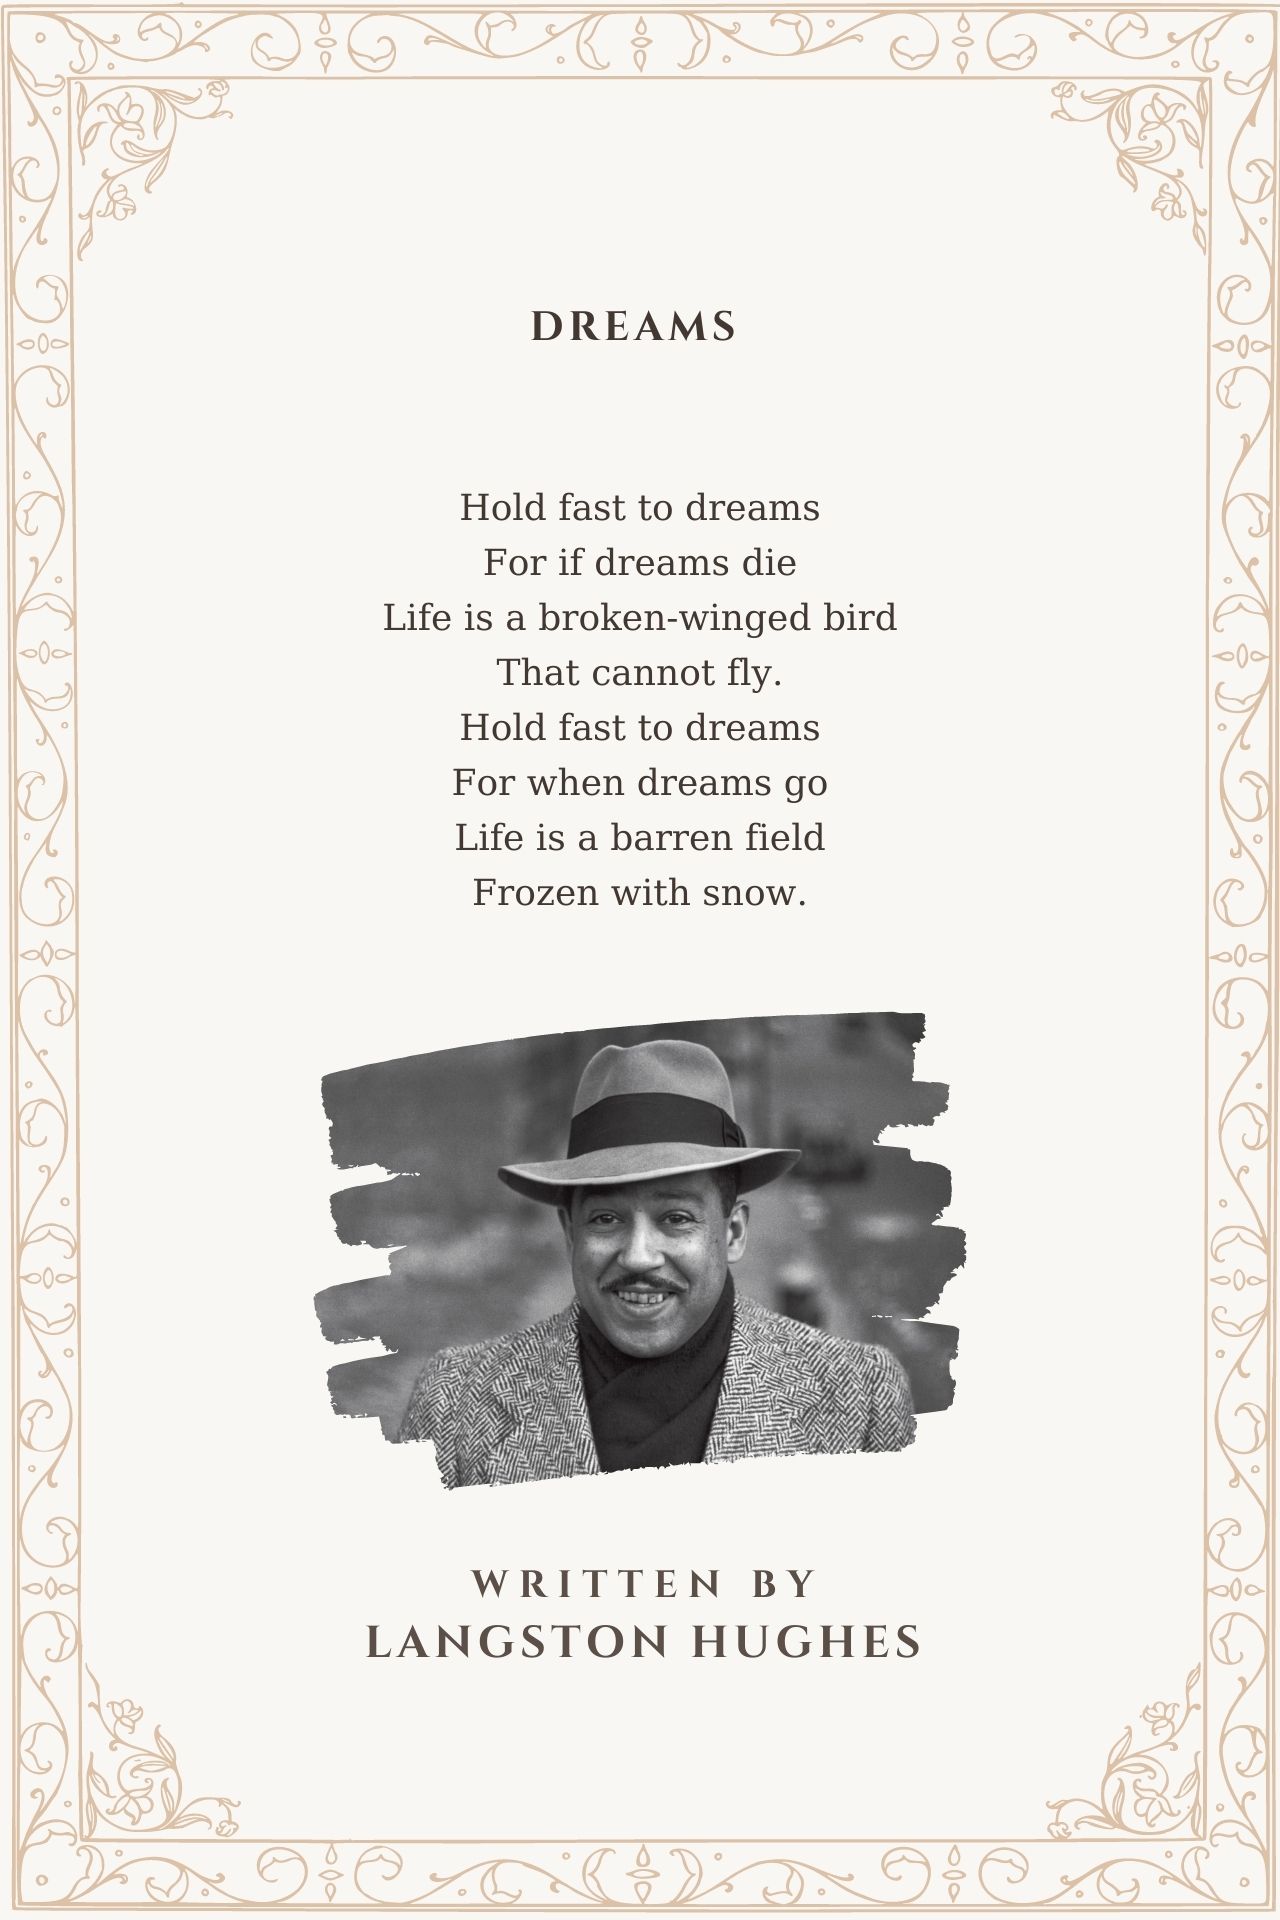 dreams by langston hughes meaning